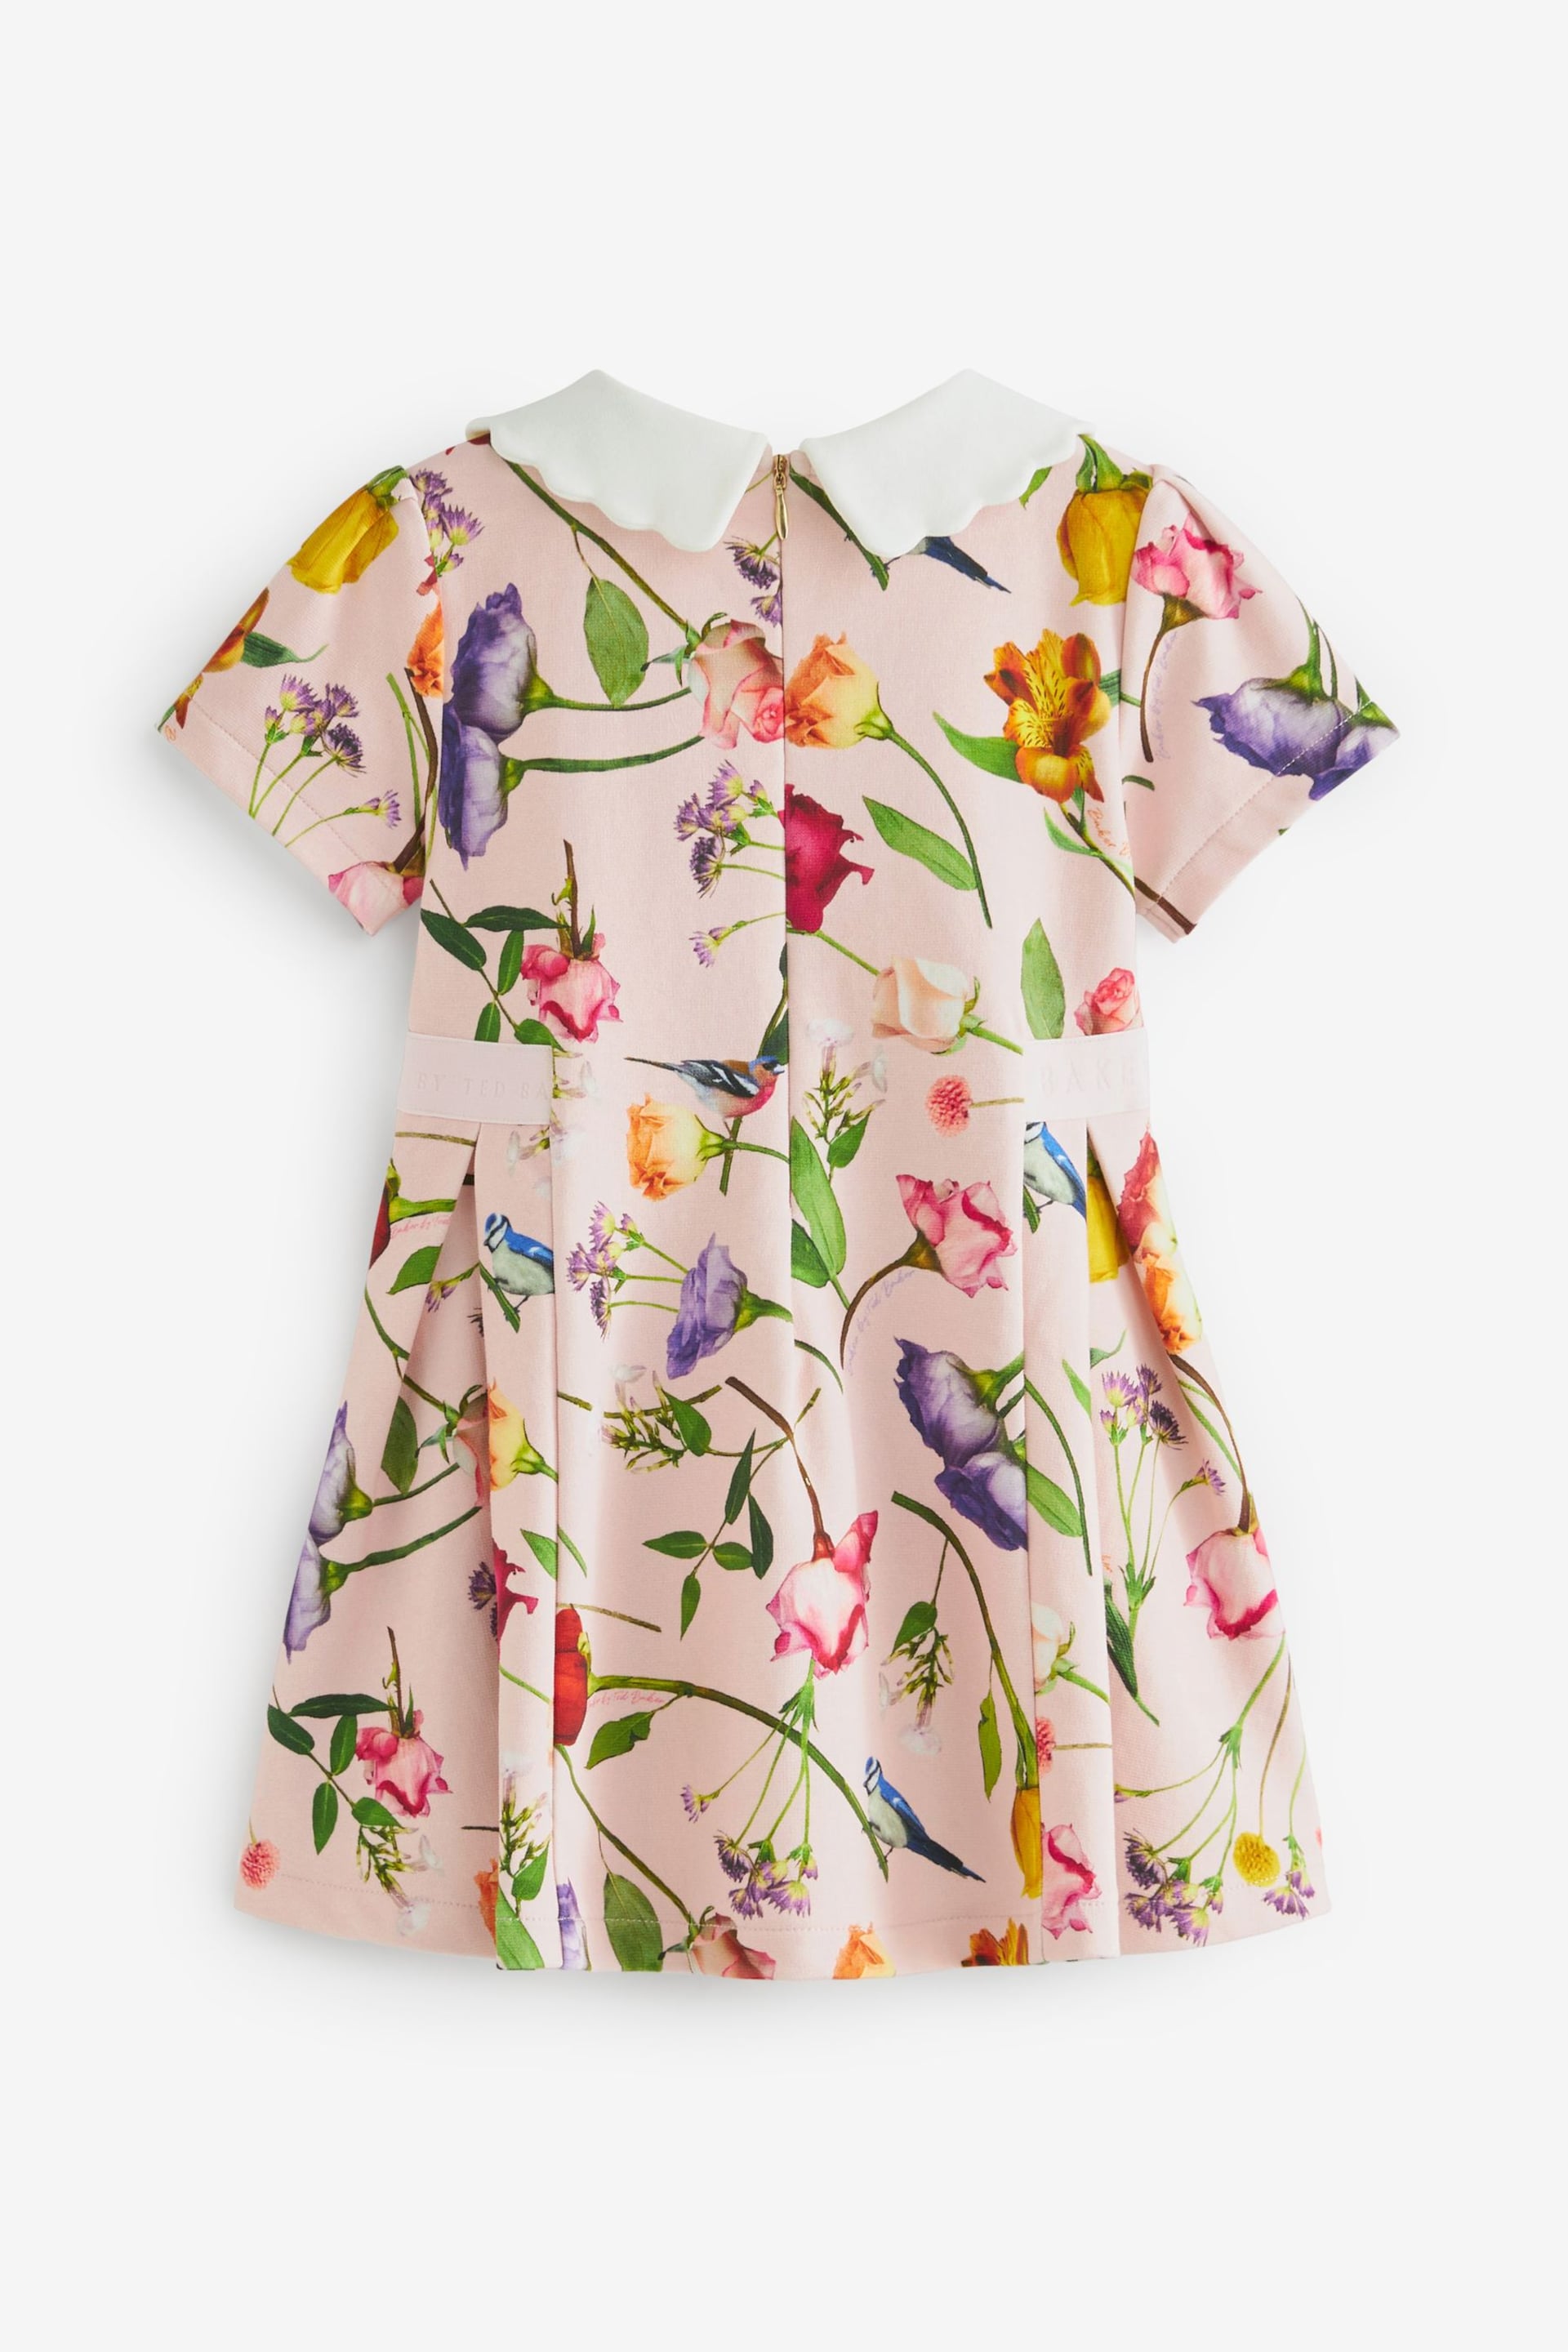 Baker by Ted Baker Pink Floral Collared Ponte Dress - Image 9 of 10